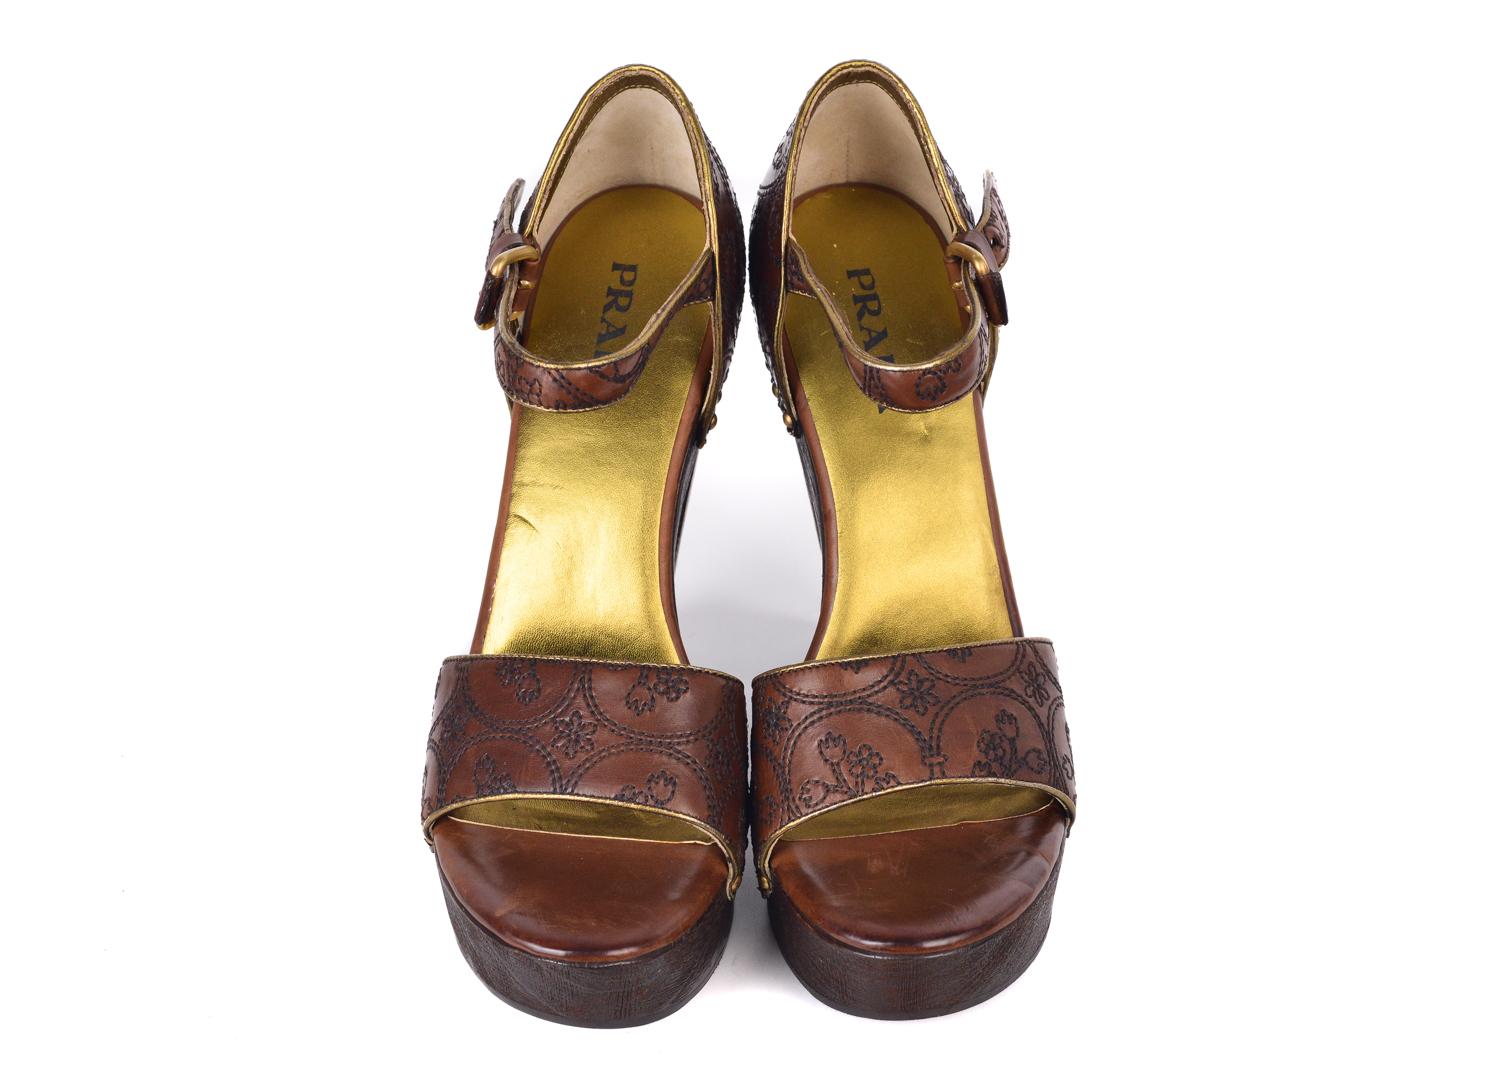 Prada Womens Brown Embroidered Leather Wooden Heel Pumps In New Condition For Sale In Brooklyn, NY